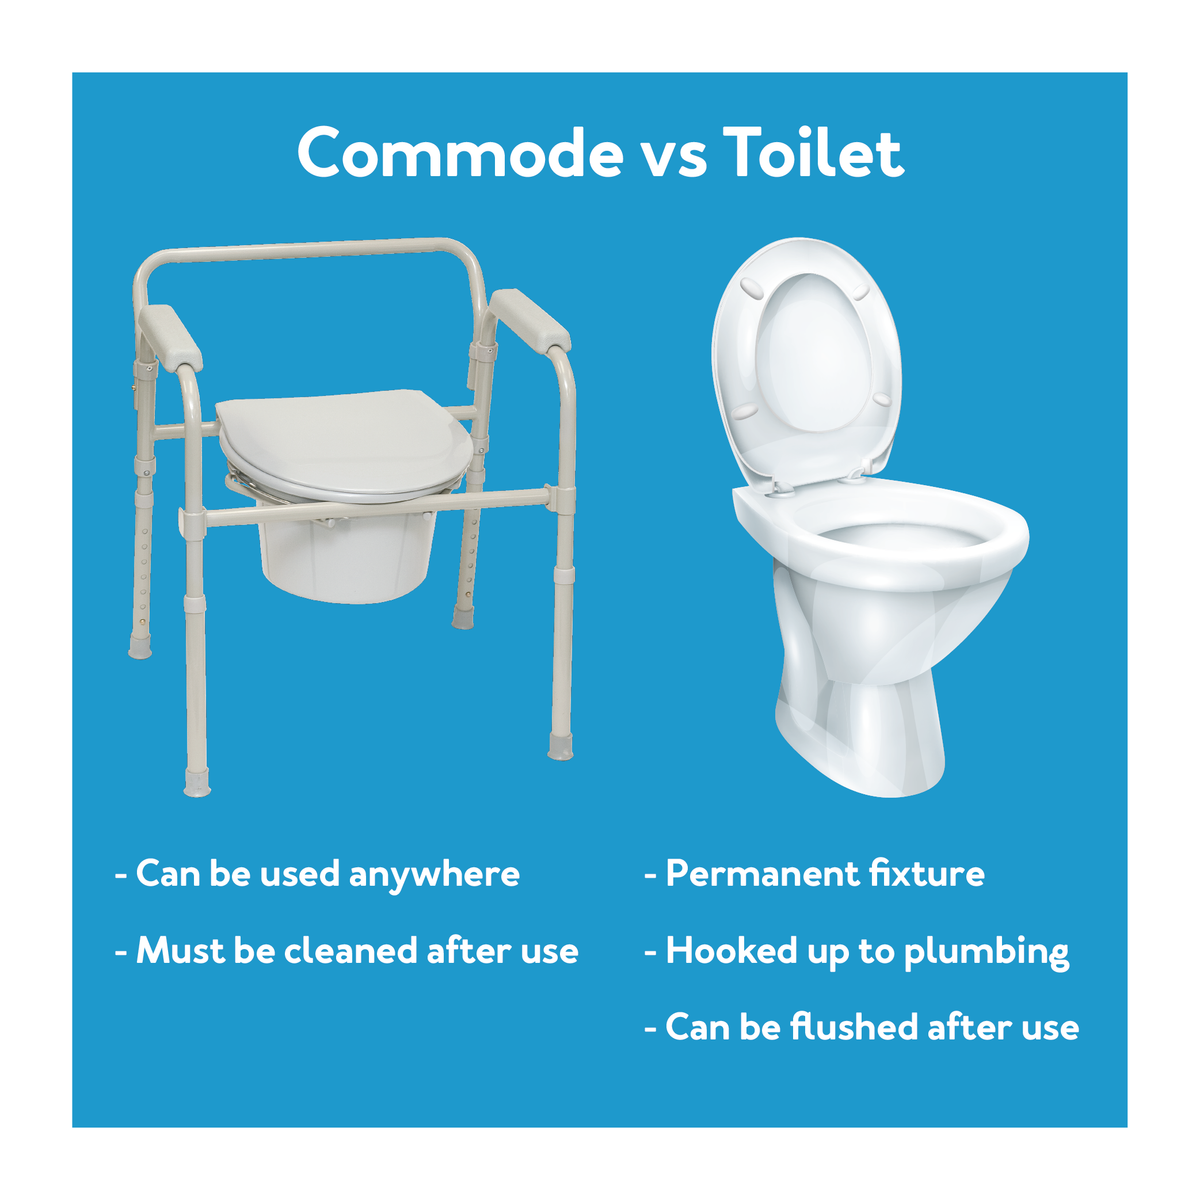 A commode next to a toilet over a blue background text commode vs Toilet, further details are provided below.